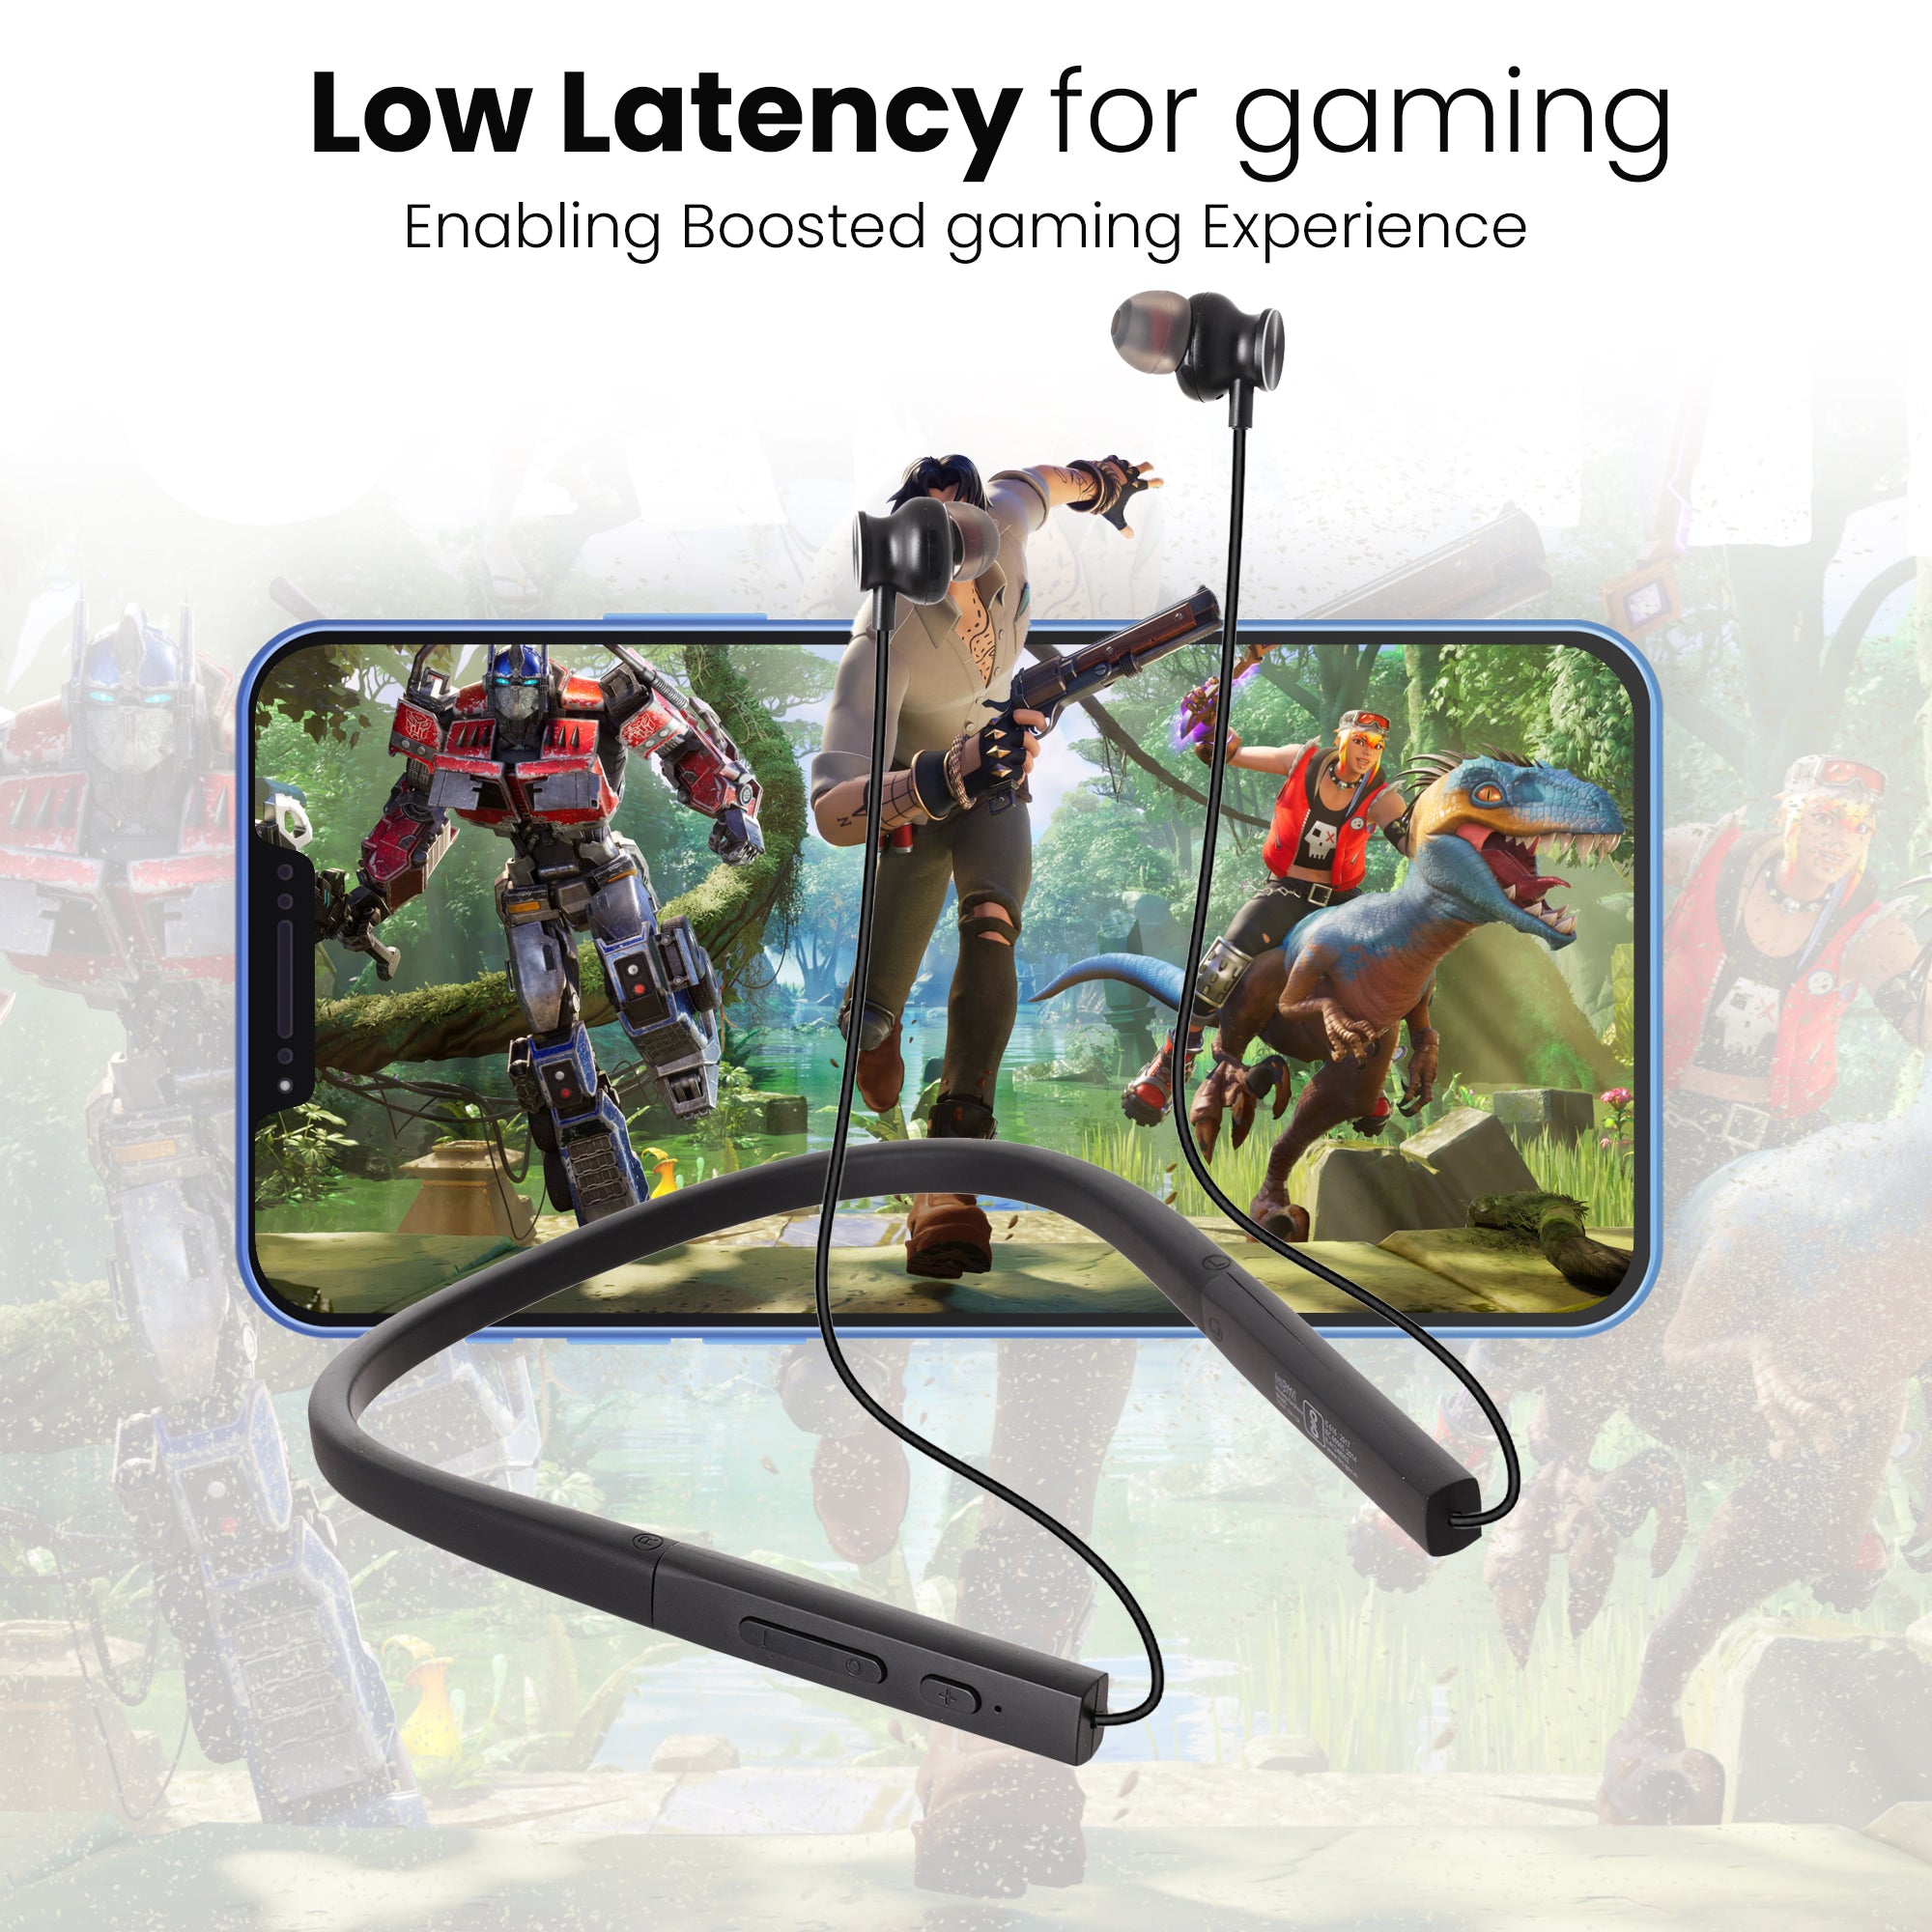 A smartphone playing an online game and black neckbands depicting low latency